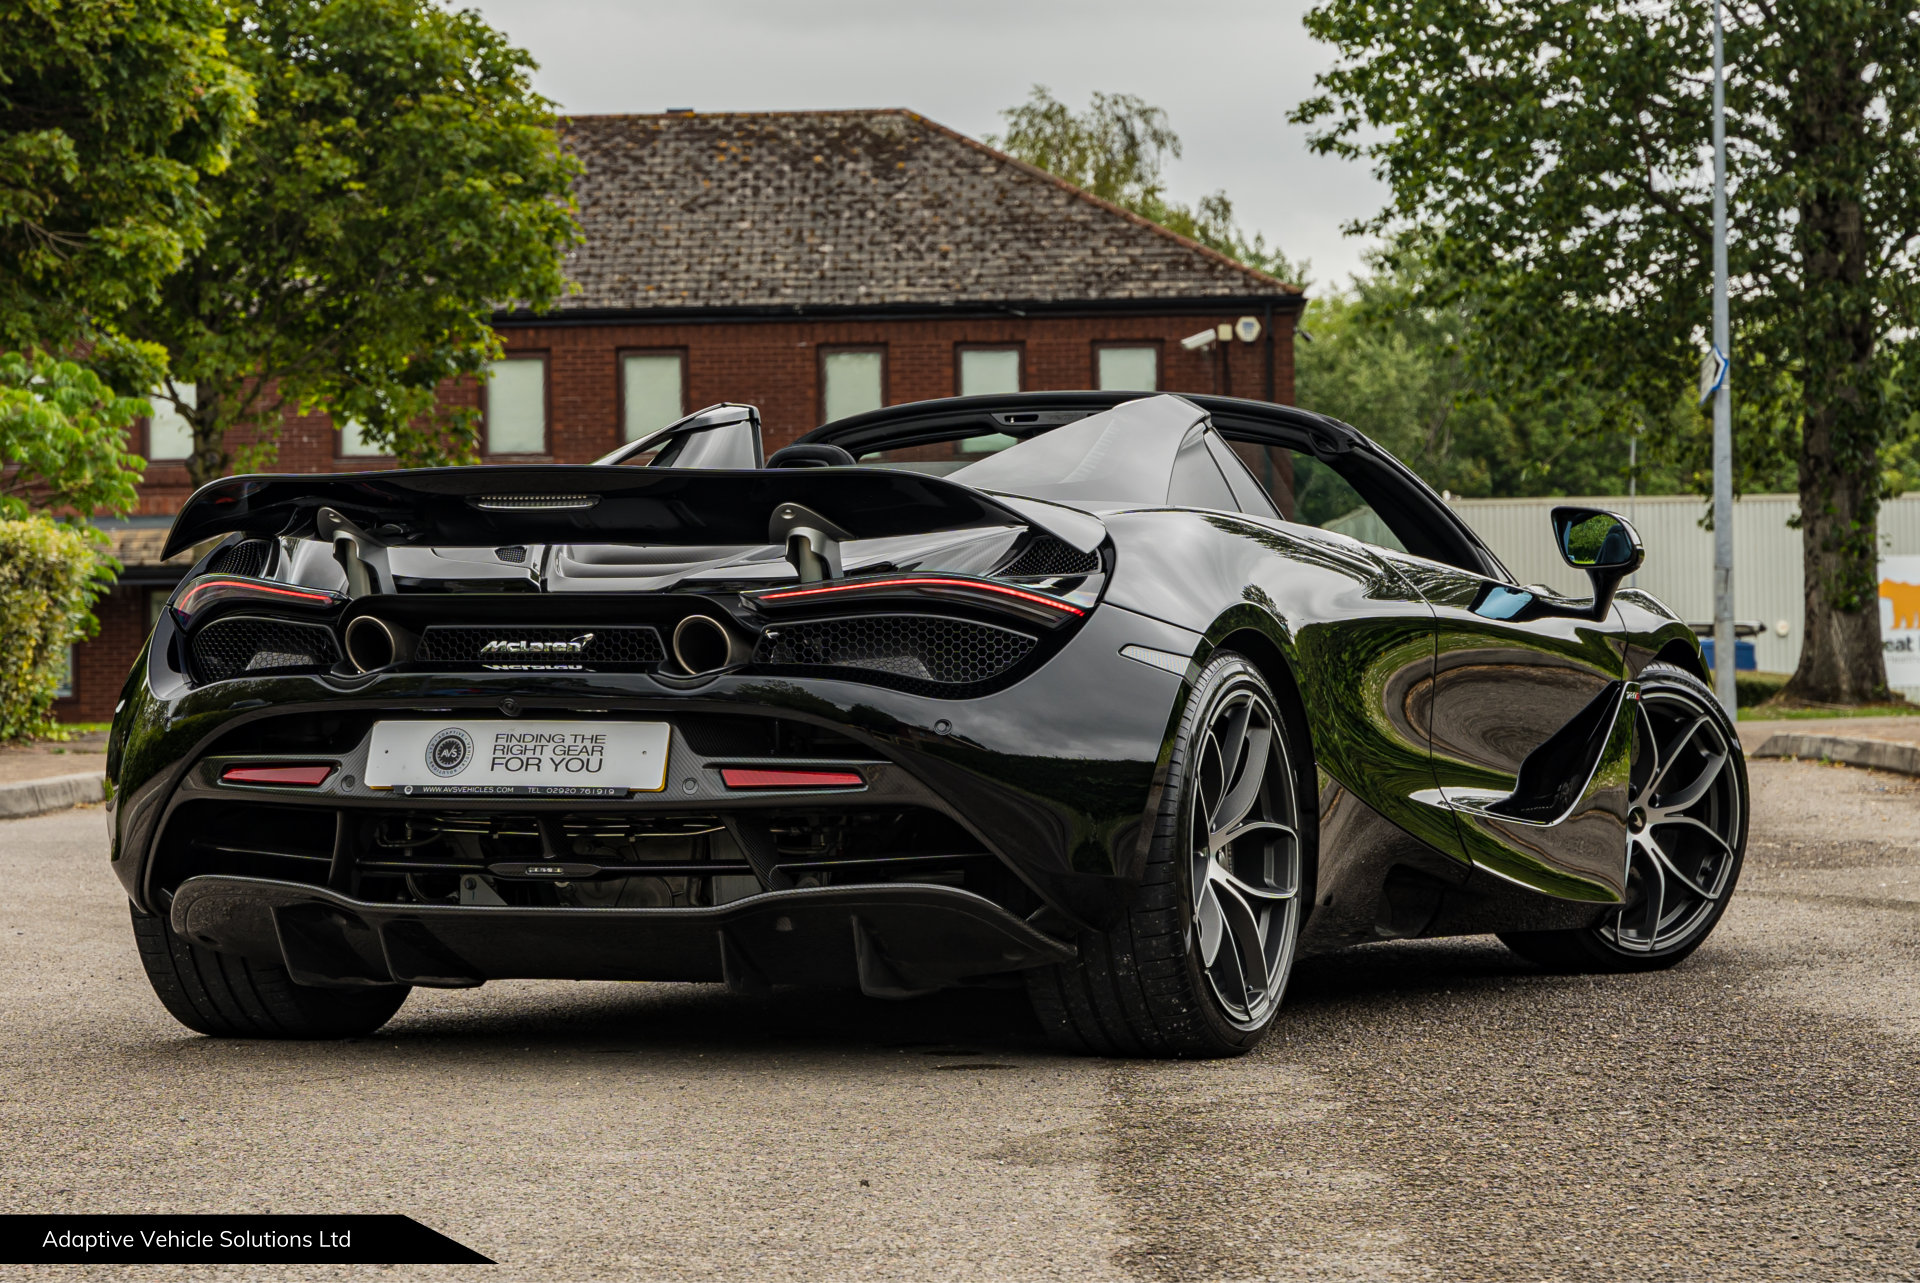 2021 McLaren 720s Spider Performance Black off side rear view roof open